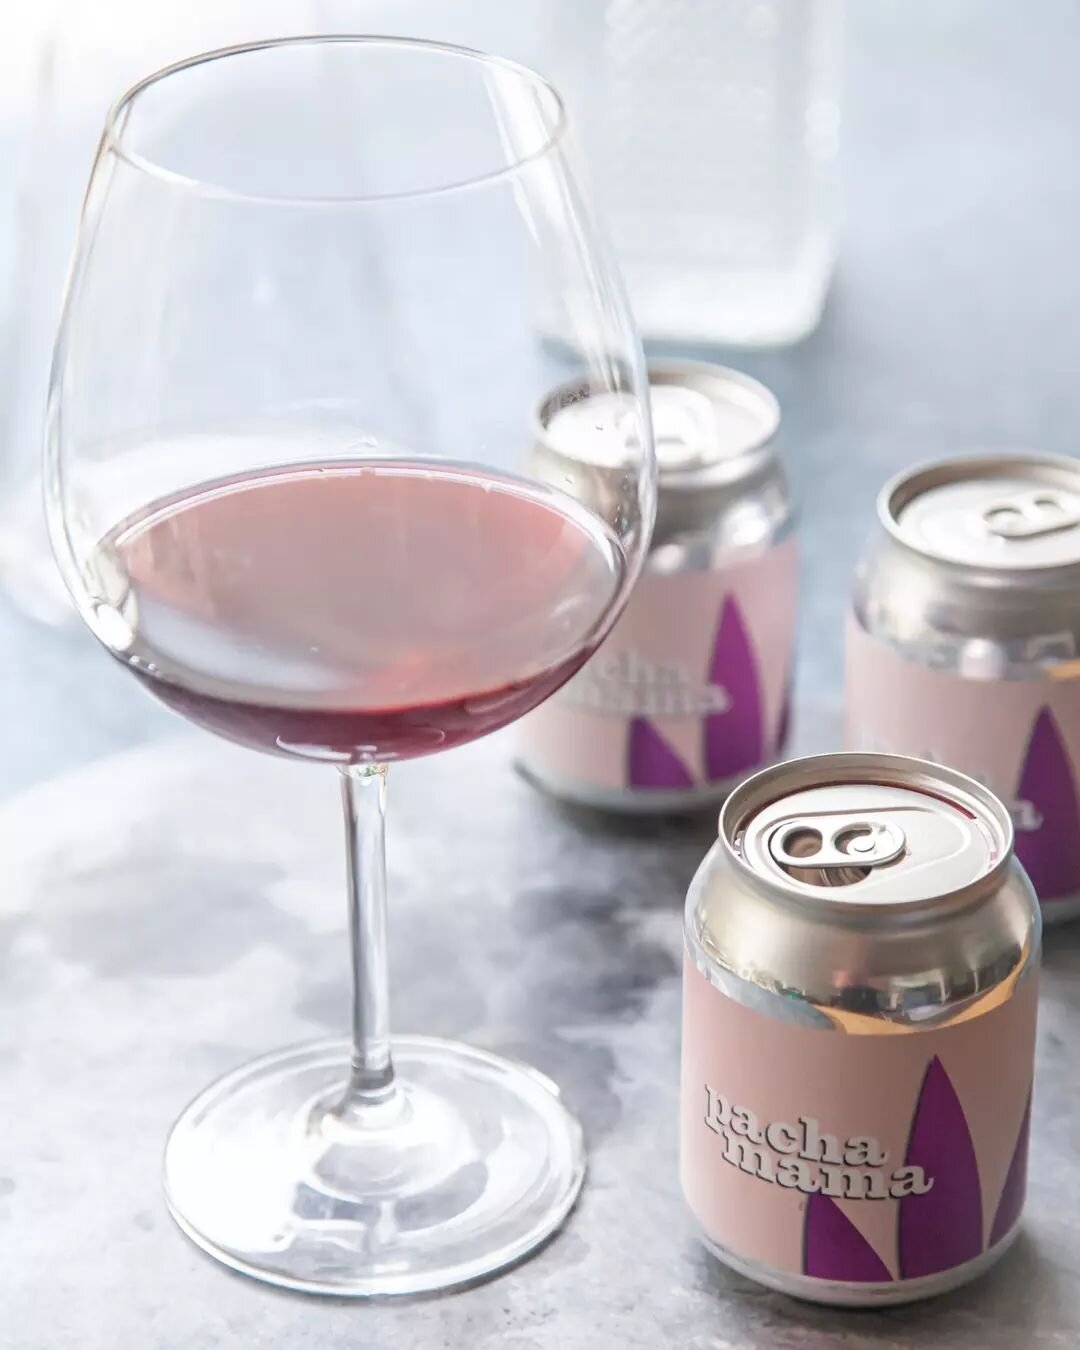 Need a little something during the week but don't want to crack a bottle?
​
​Our Pinot Shiraz cans are a deliciously juicy vibrant blend of Pinot Noir and Shiraz. Canned straight from the barrel, unfined and unfiltered. It&rsquo;s serious wine in a f